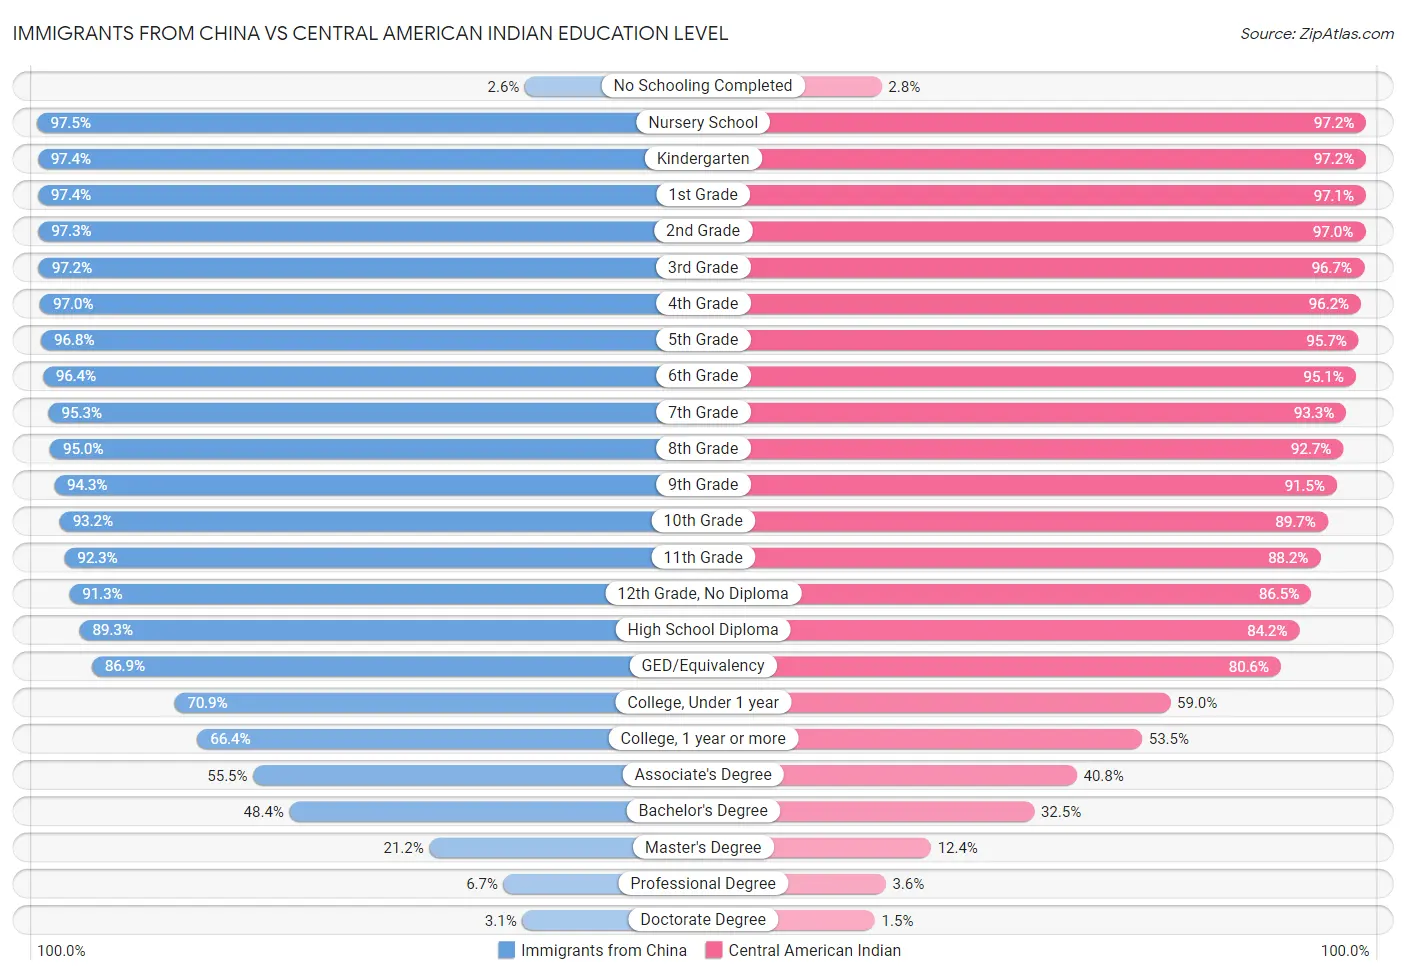 Immigrants from China vs Central American Indian Education Level